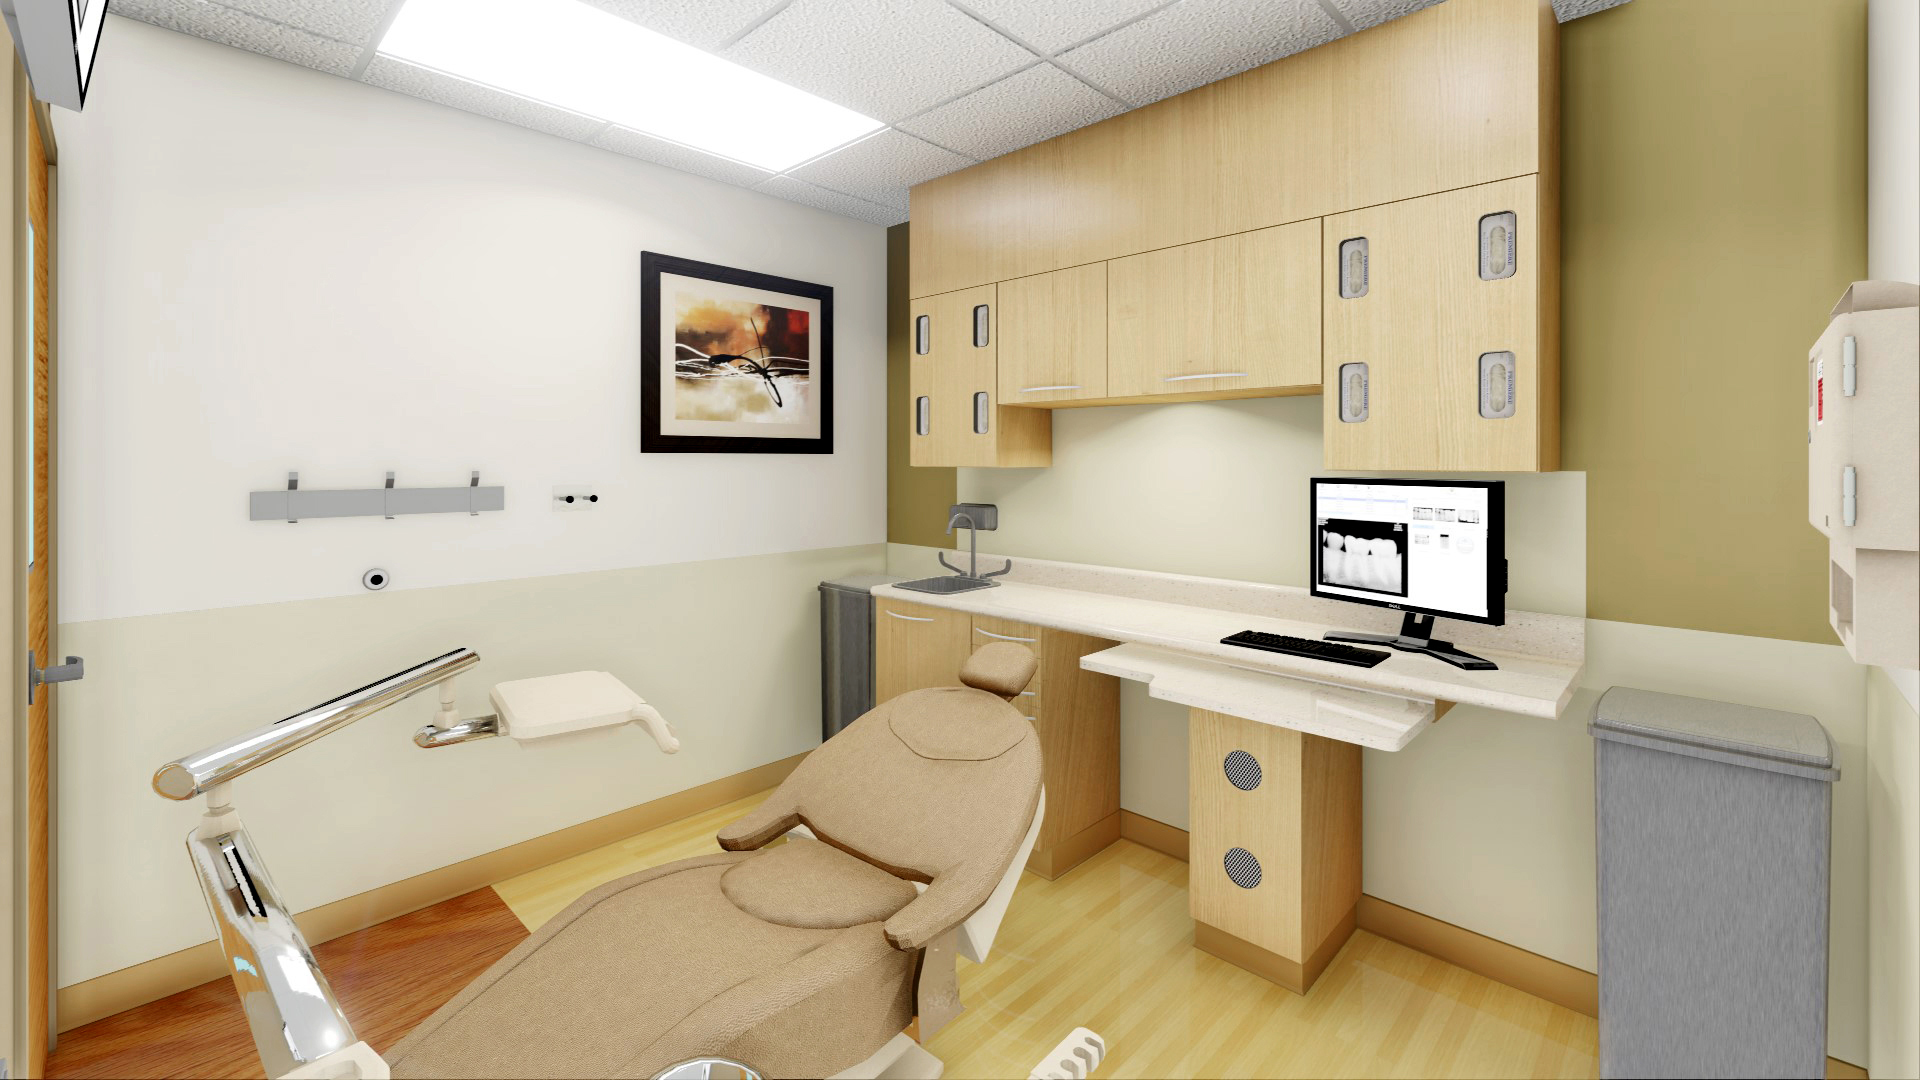 Clinic concept rendering